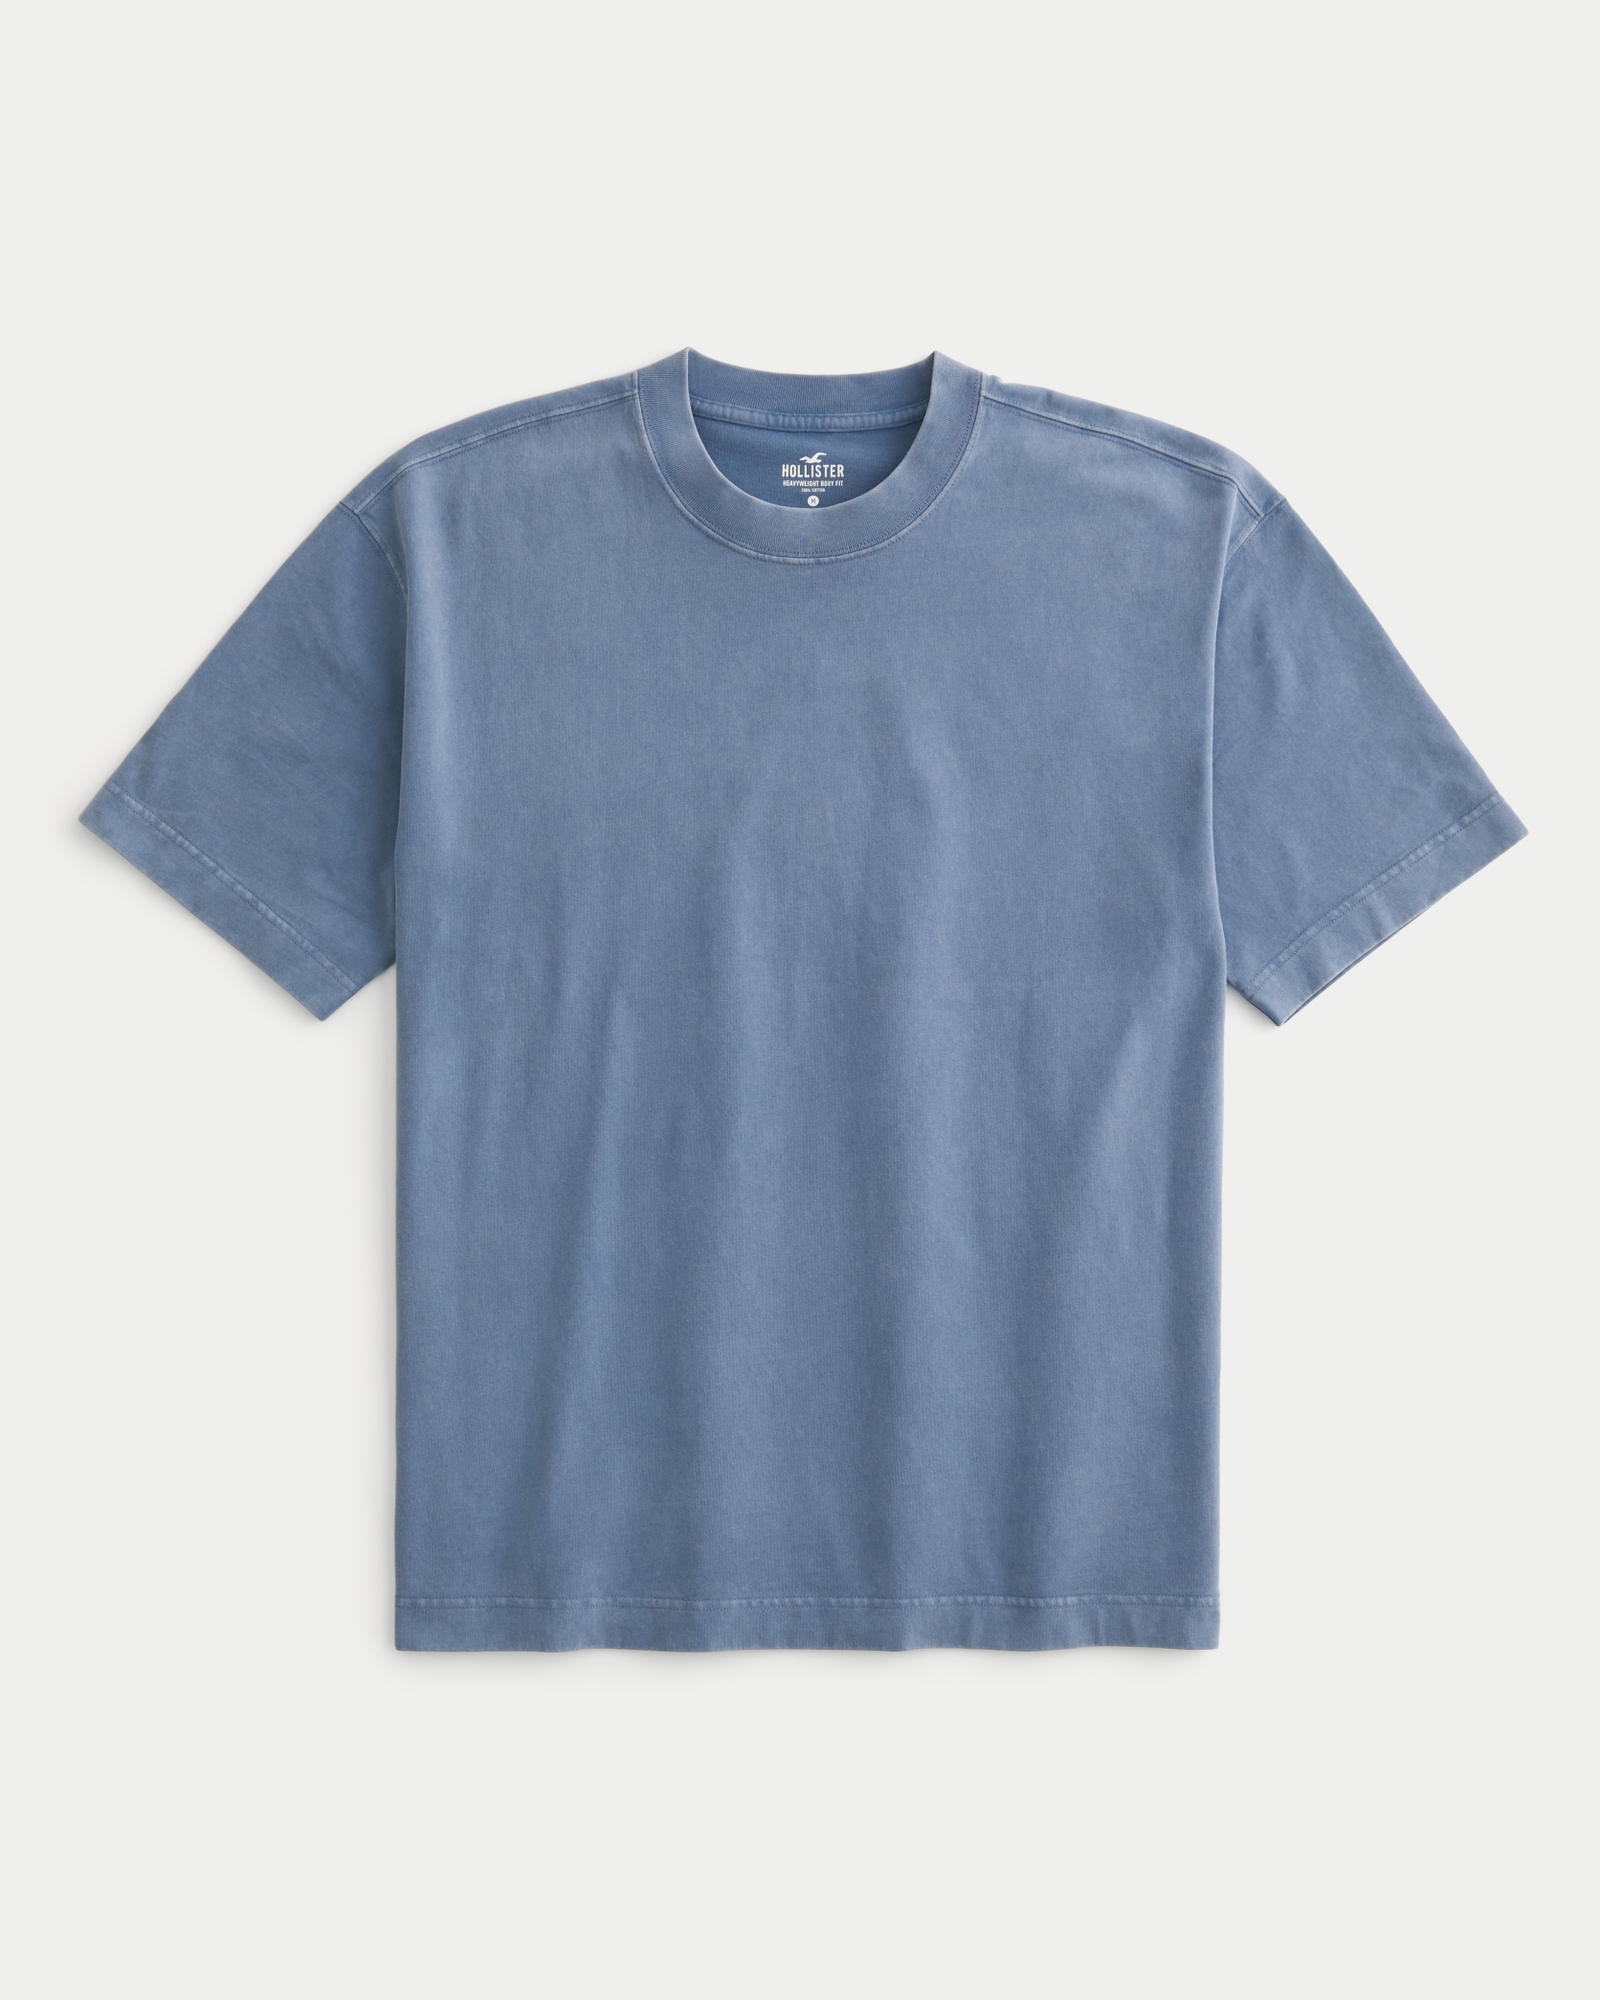 Hollister central logo oversized boxy fit t-shirt in turquoise